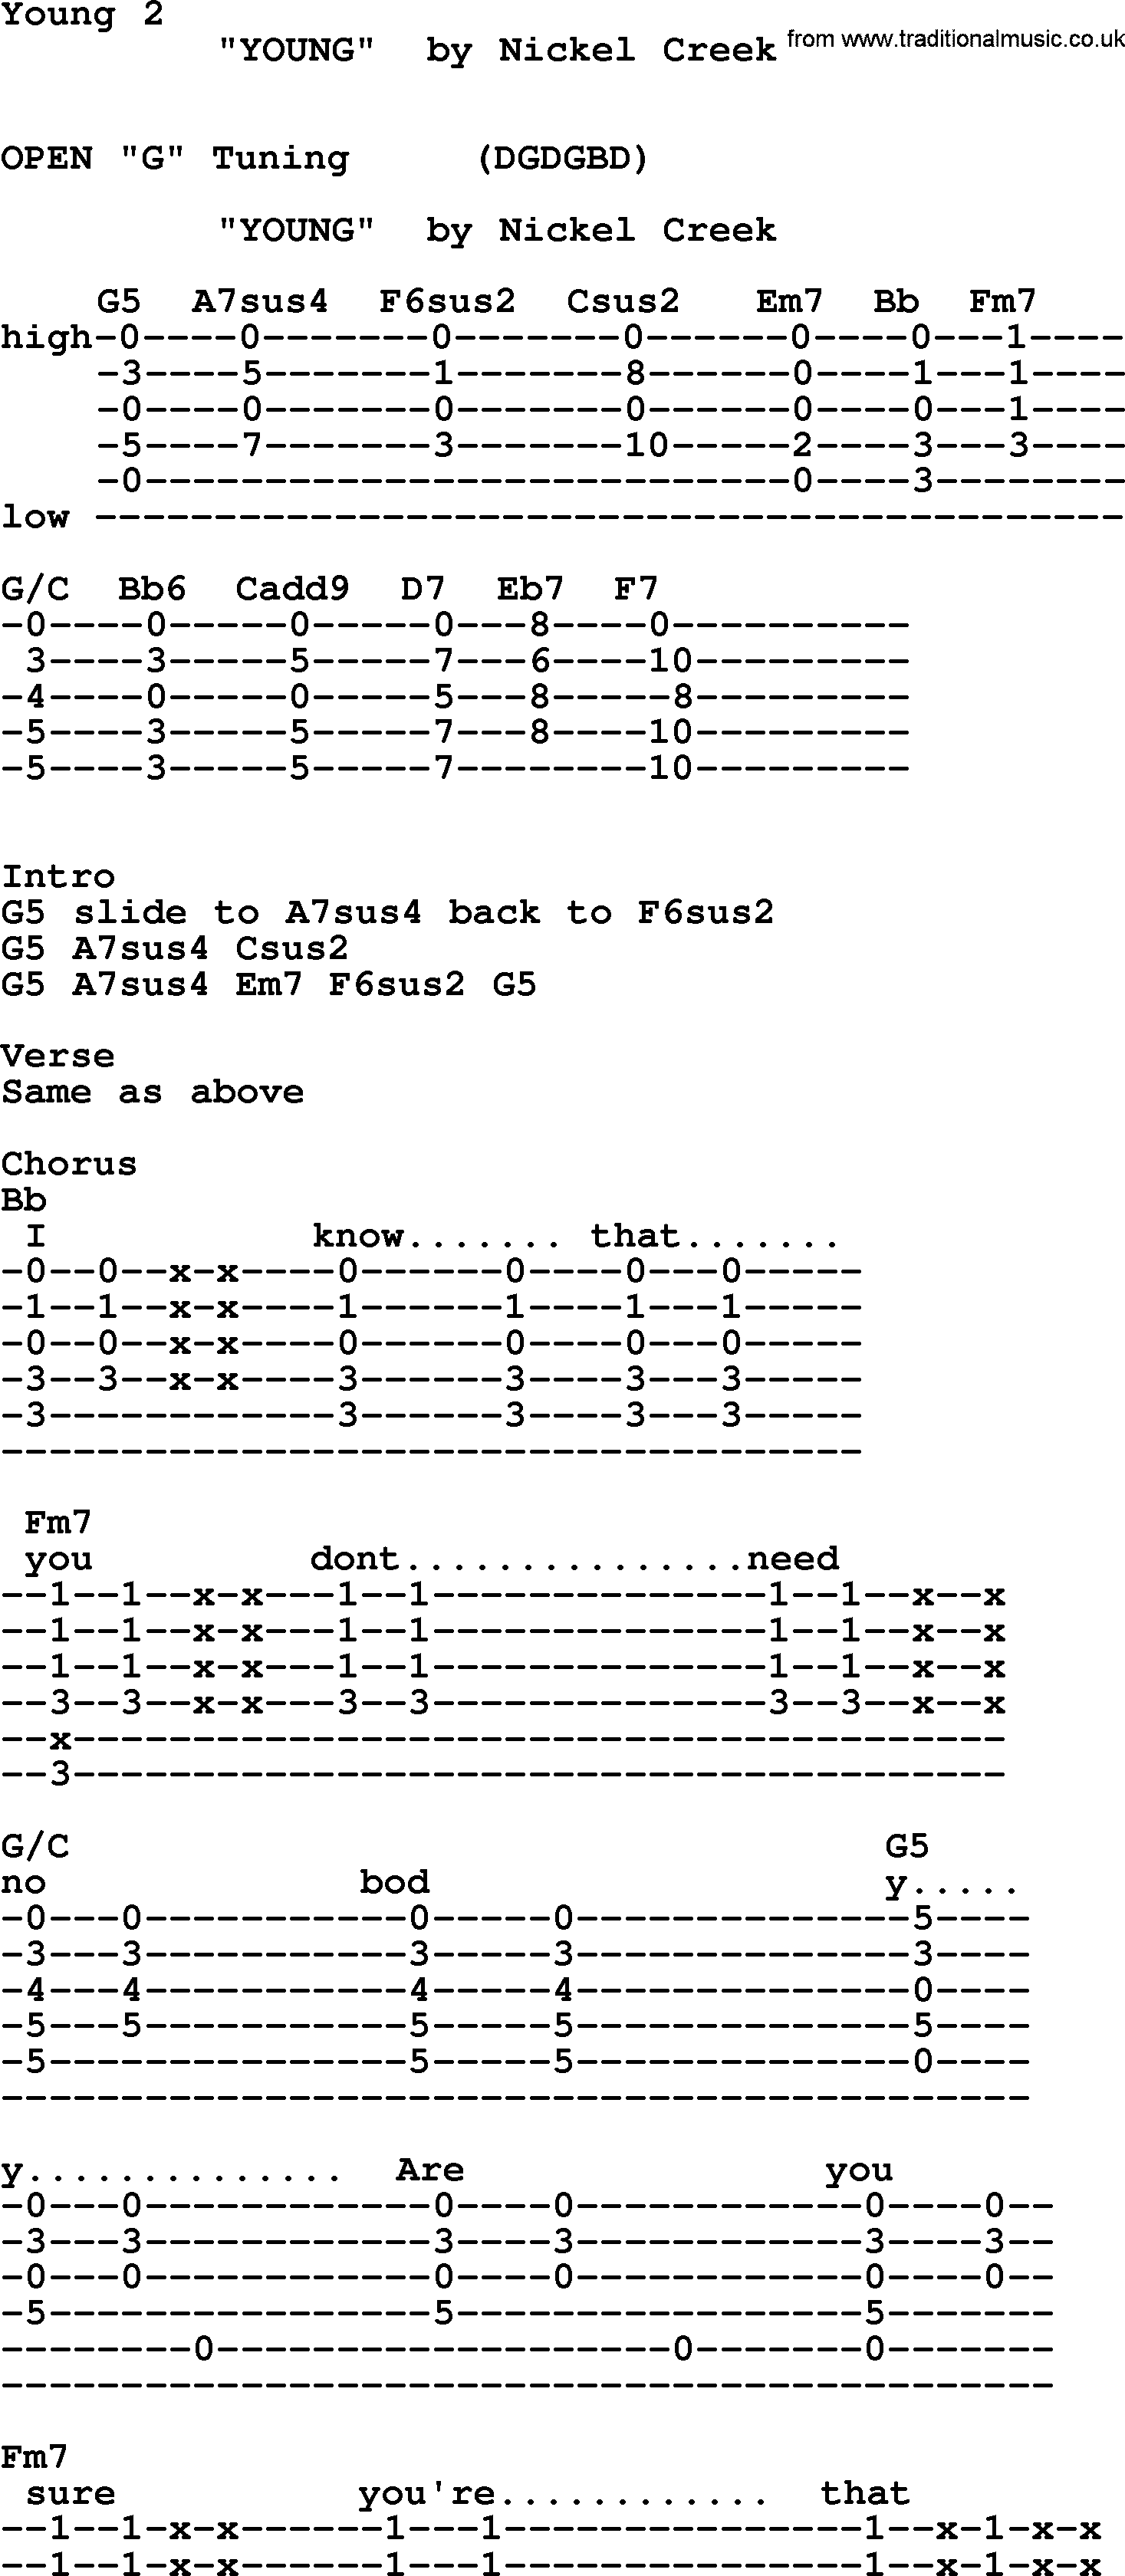 Bluegrass song: Young 2, lyrics and chords